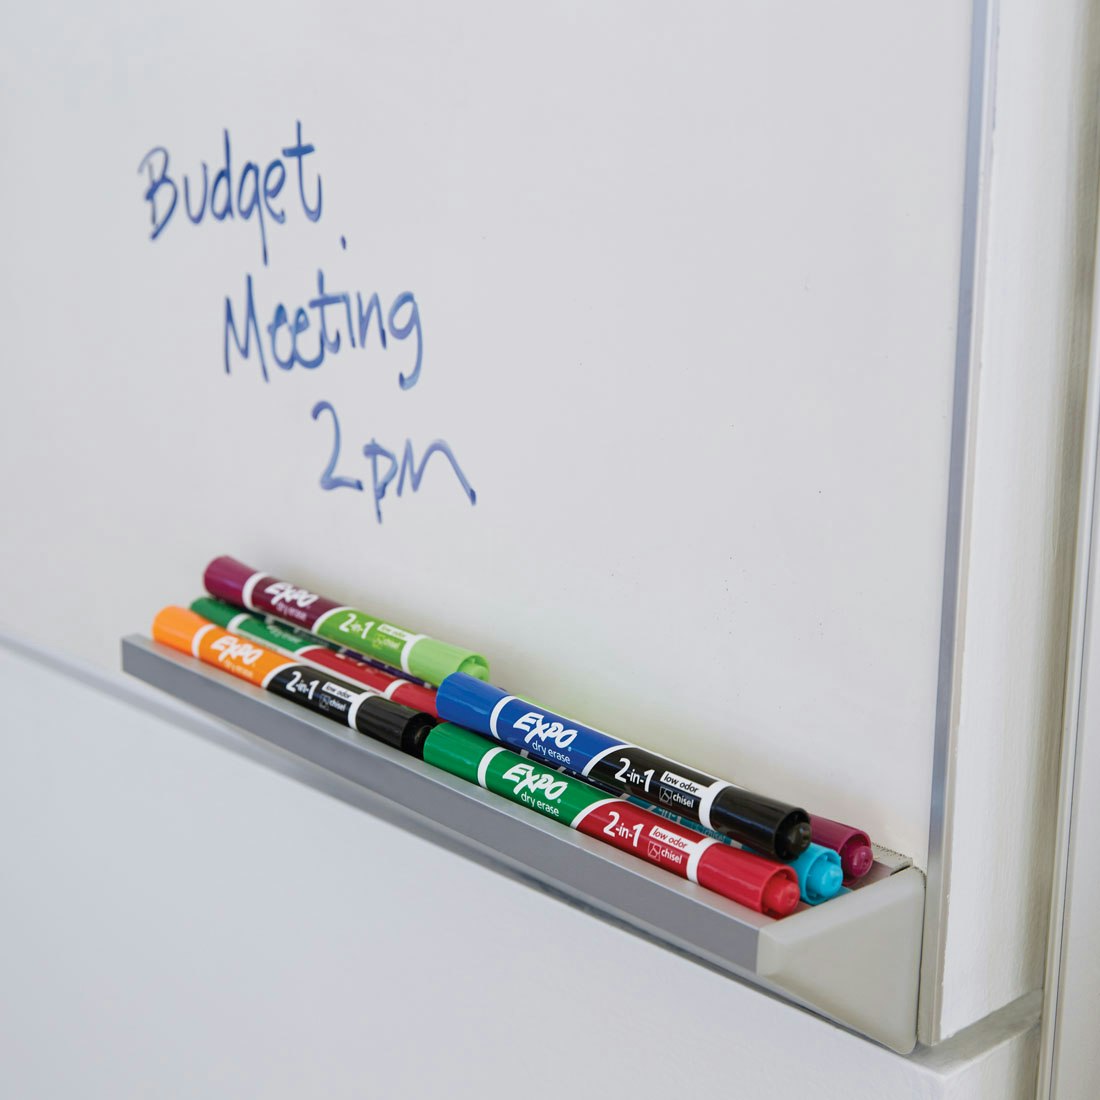 whiteboard-with-message-and-stacks-of-expo-2in1-markers.jpg